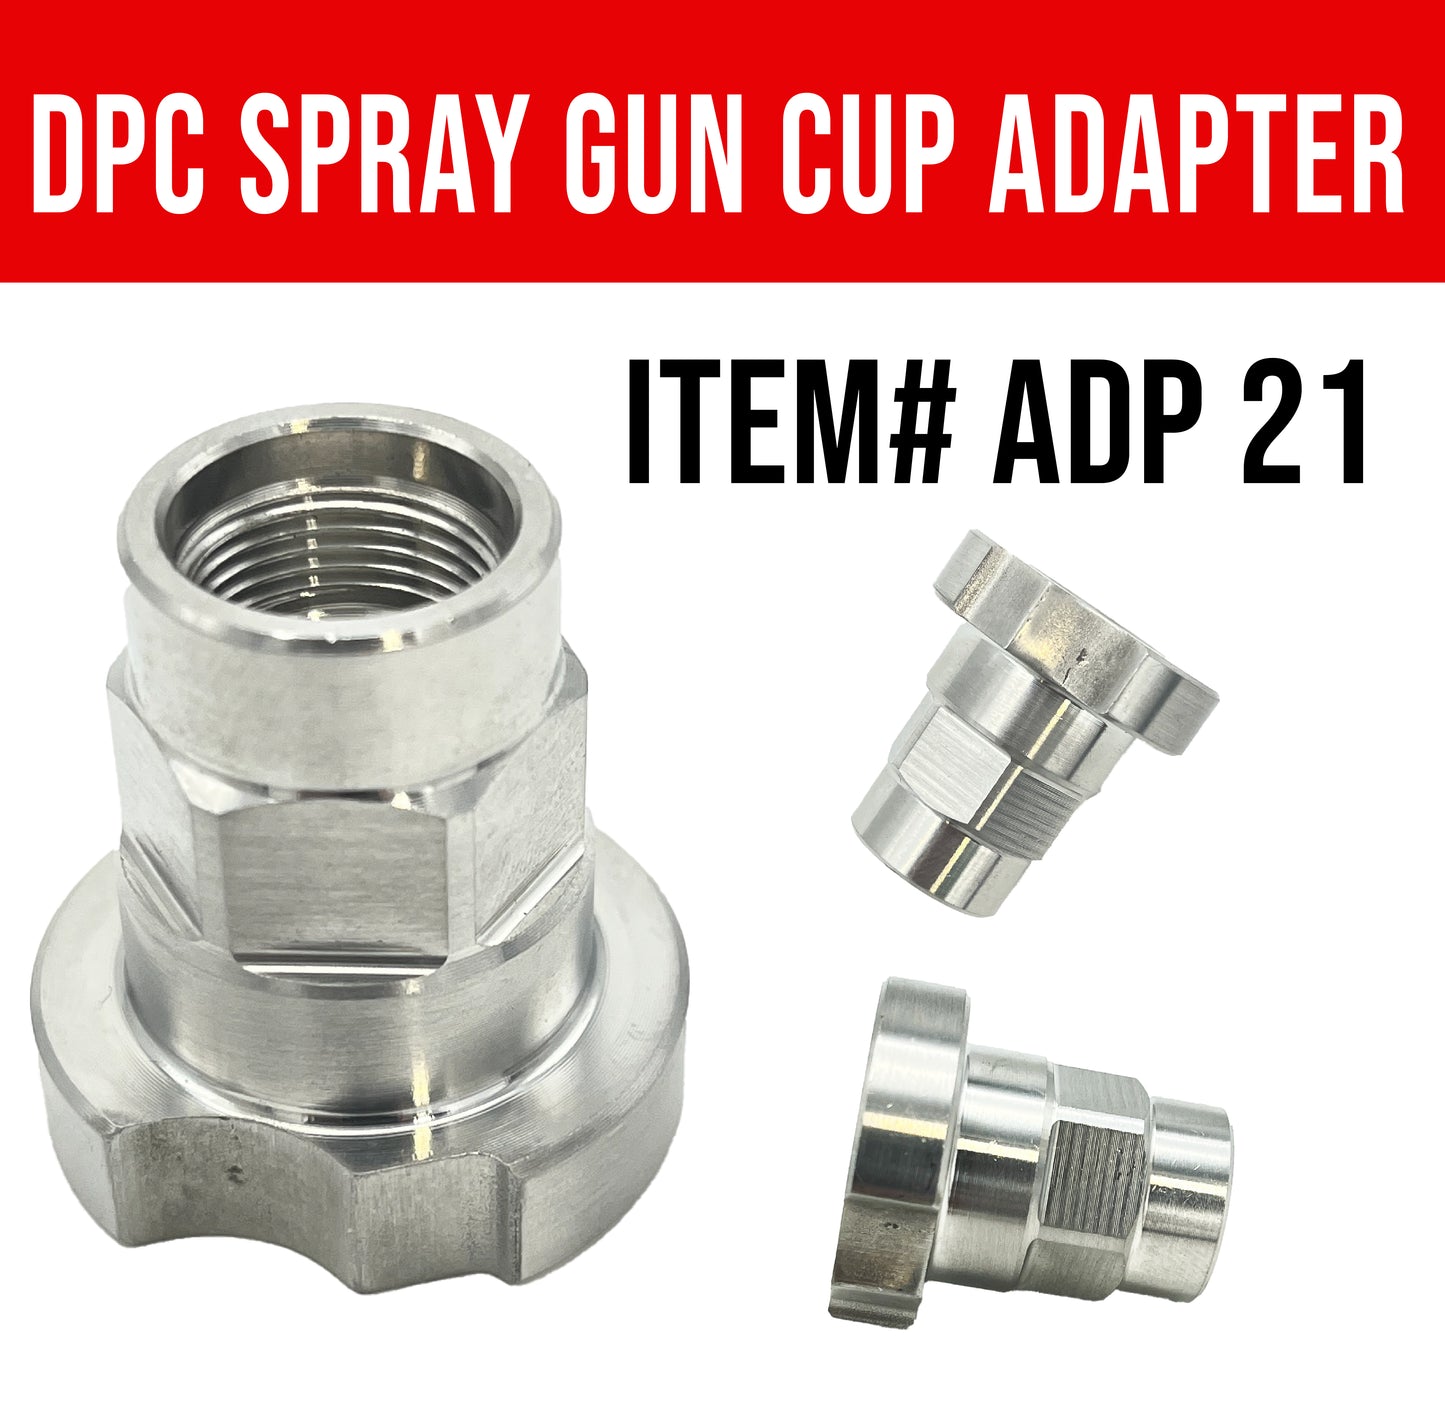 Spray Gun Paint System Adapter (21) 16105 (Aftermarket) Compatible with PPS 1.0 System Only and the Disposable Spray Gun Cup Liners and Lid System